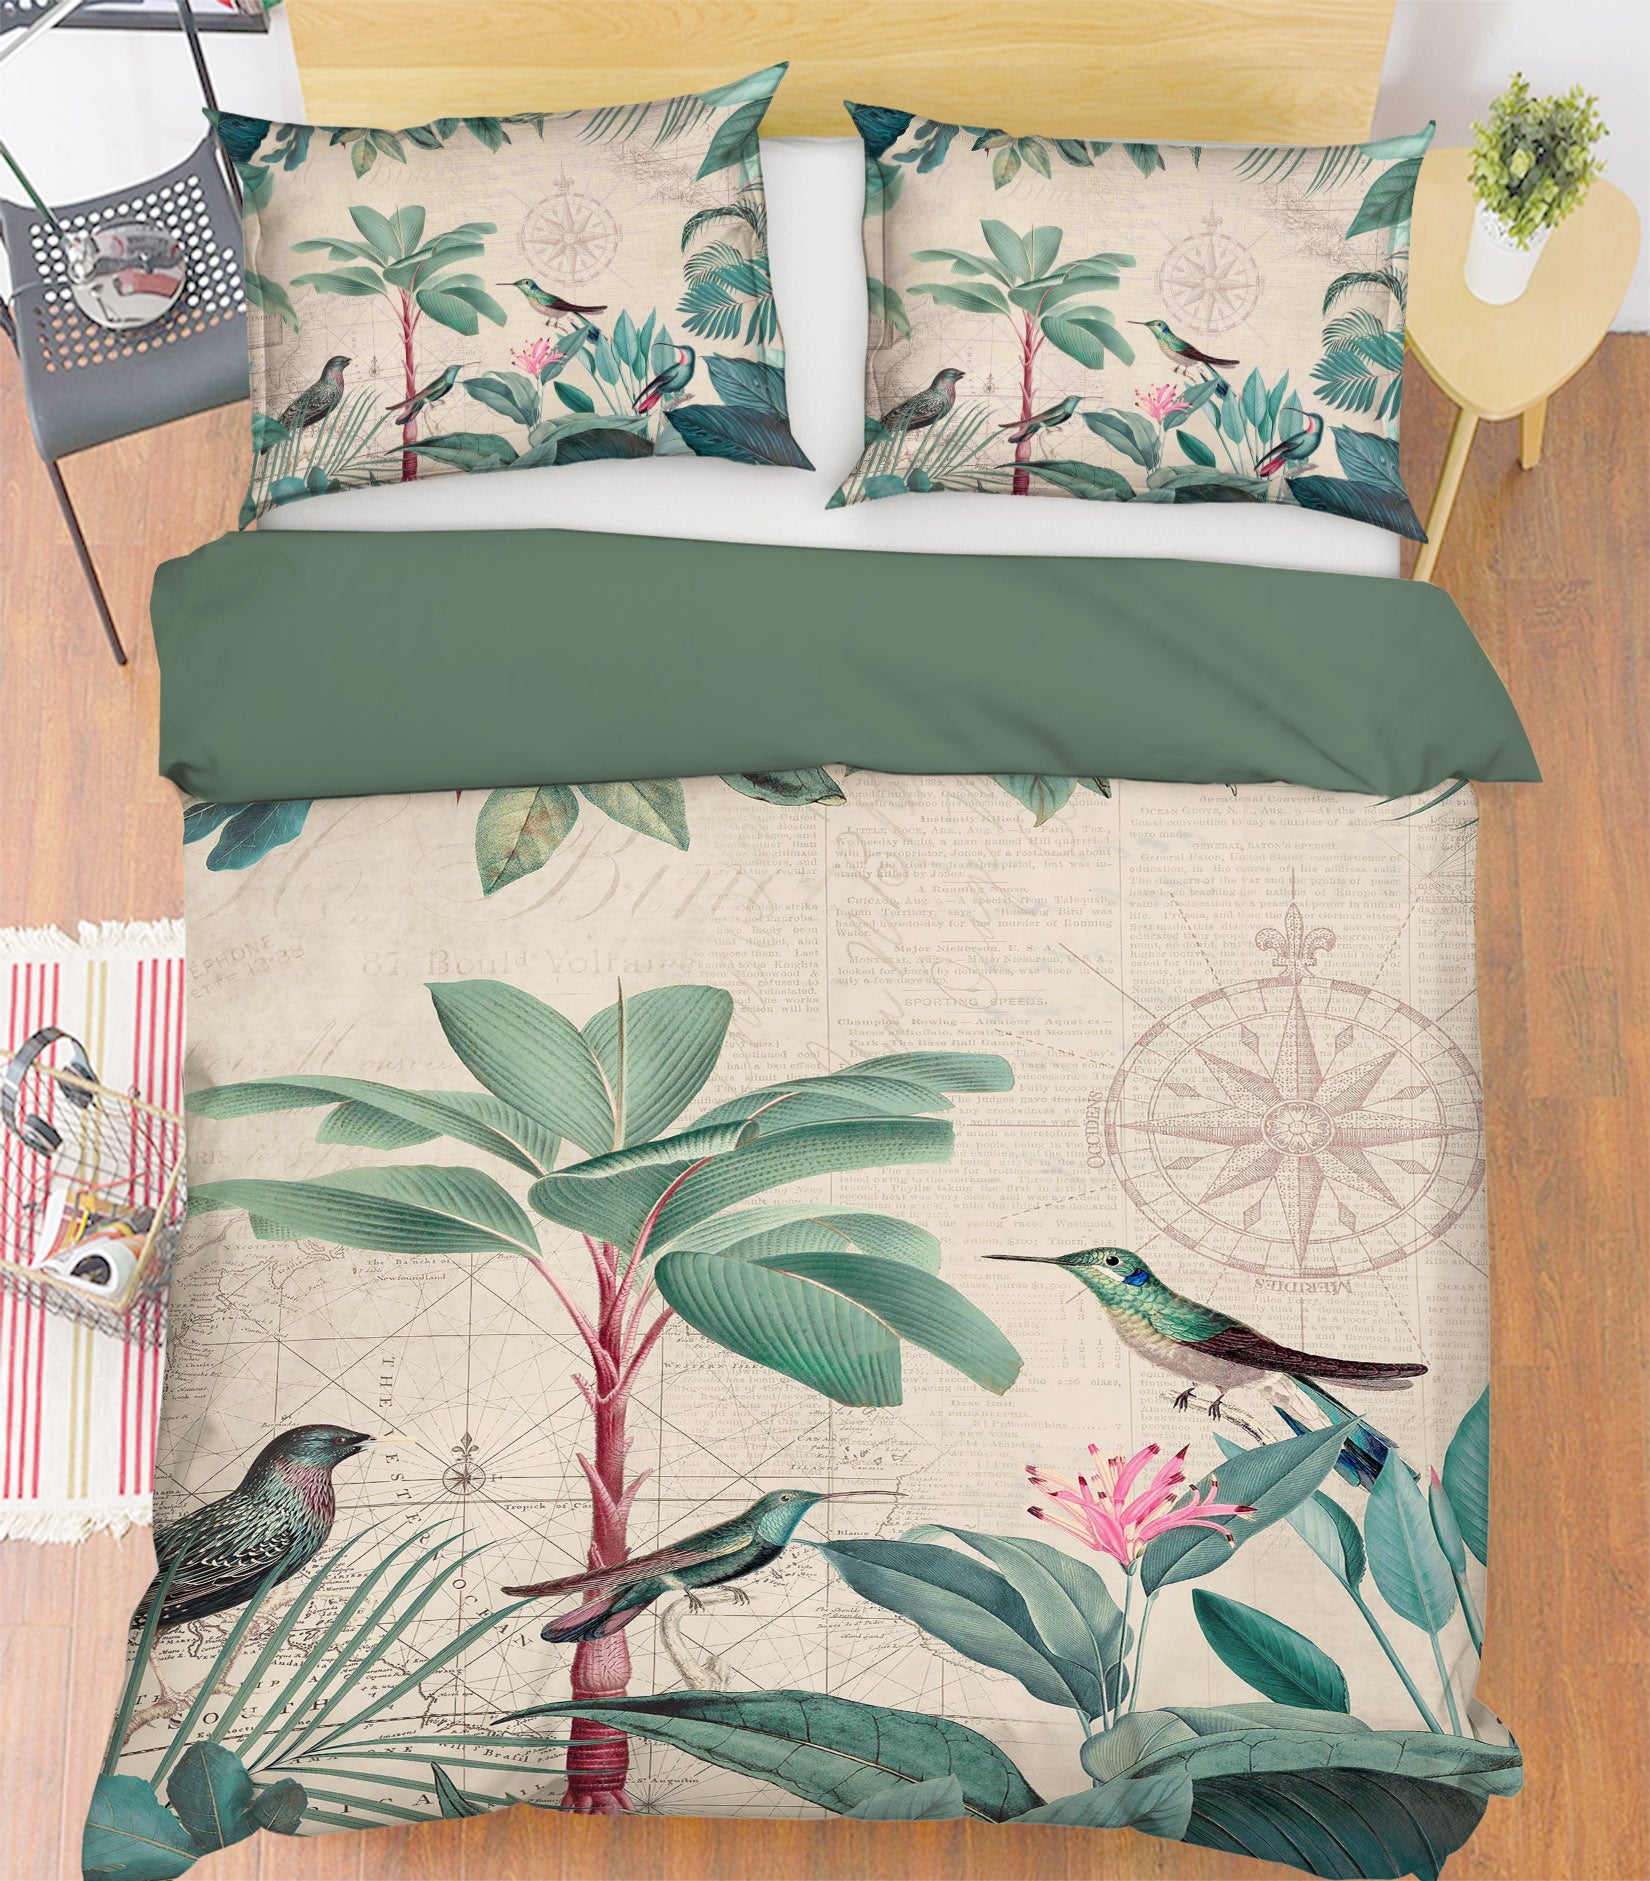 3D Coconut Tree Bird 121 Andrea haase Bedding Bed Pillowcases Quilt